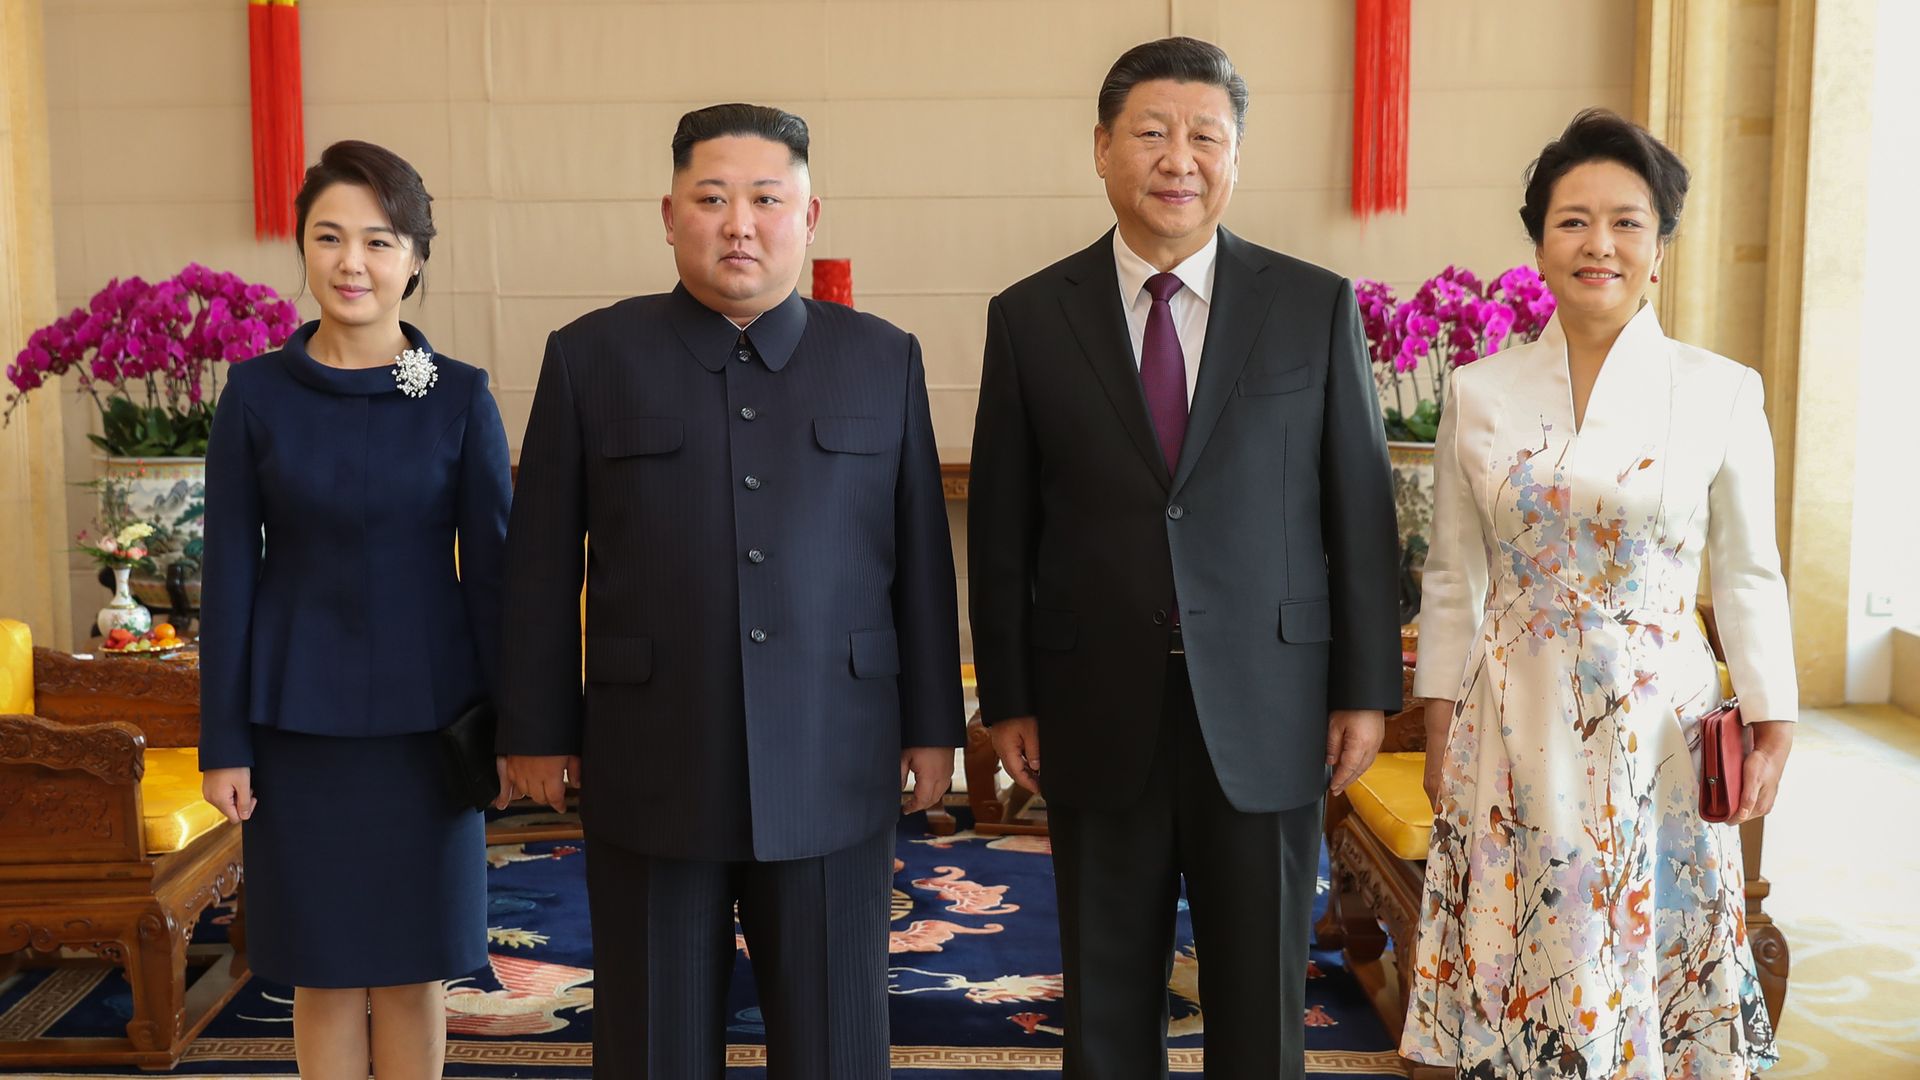 China President Xi Jinping and North korean Leder Kim Jong Un in China with their wives. Photo: Xinhua/Huang Jingwen via Getty Images